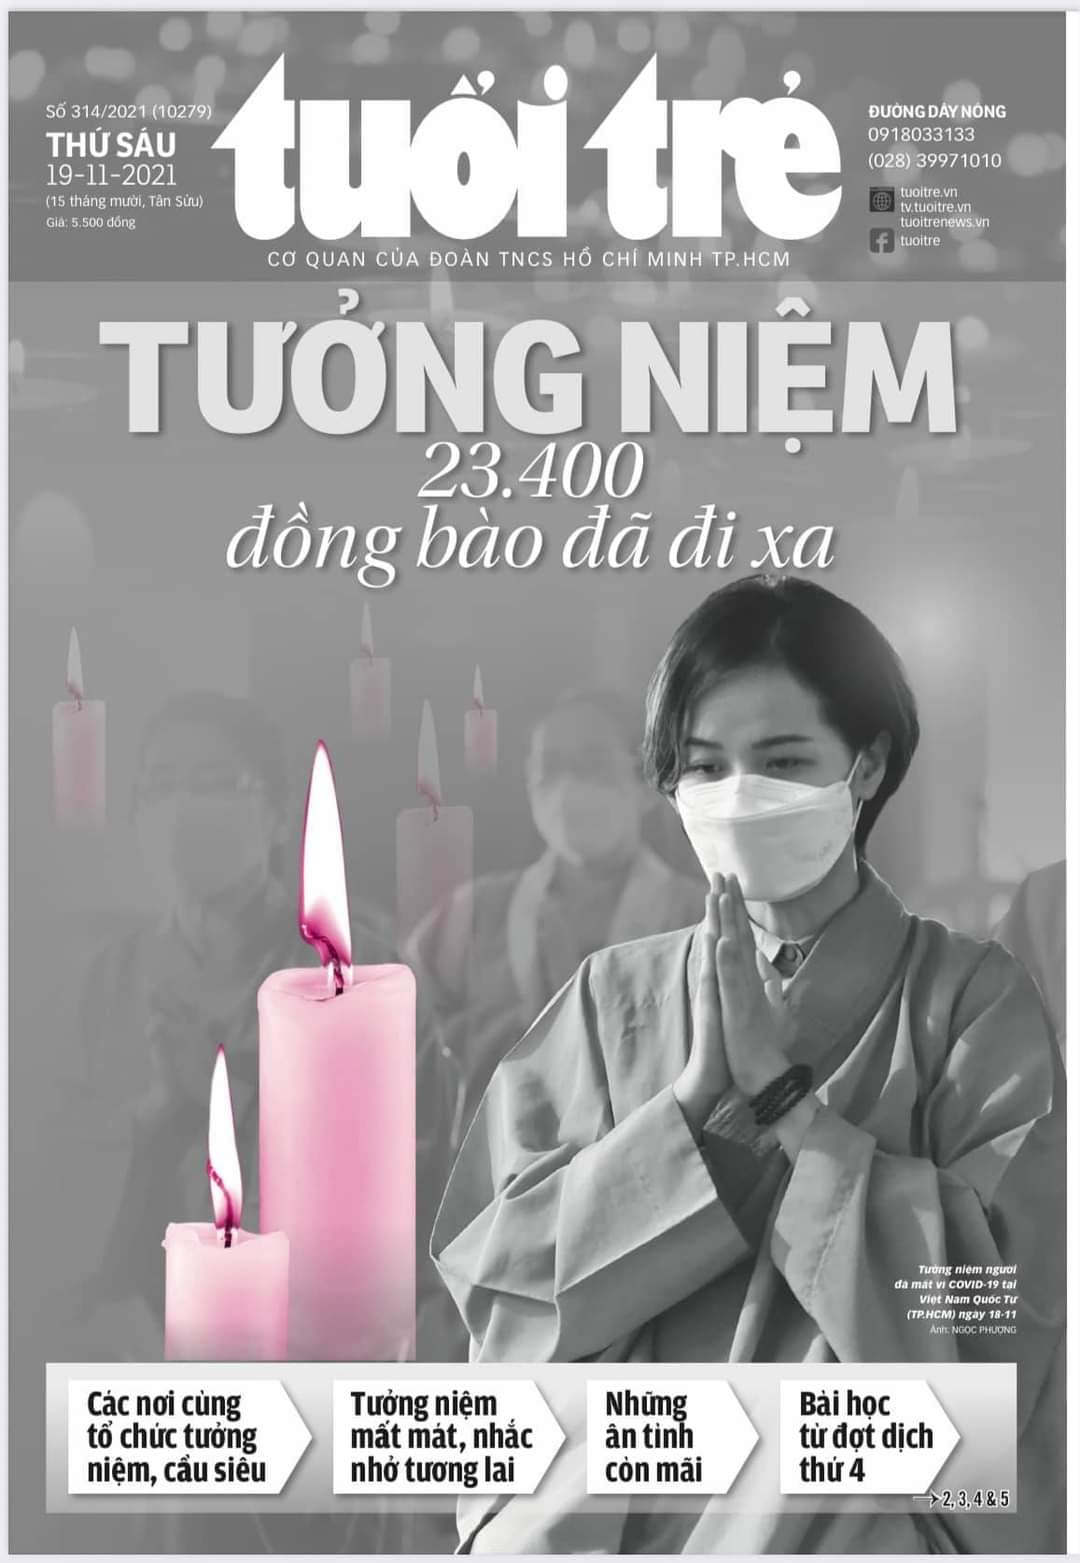 Tuoi Tre turns its November 19, 2021 cover black and white to mourn the deaths of over 23,000 COVID-19 victims in Vietnam.